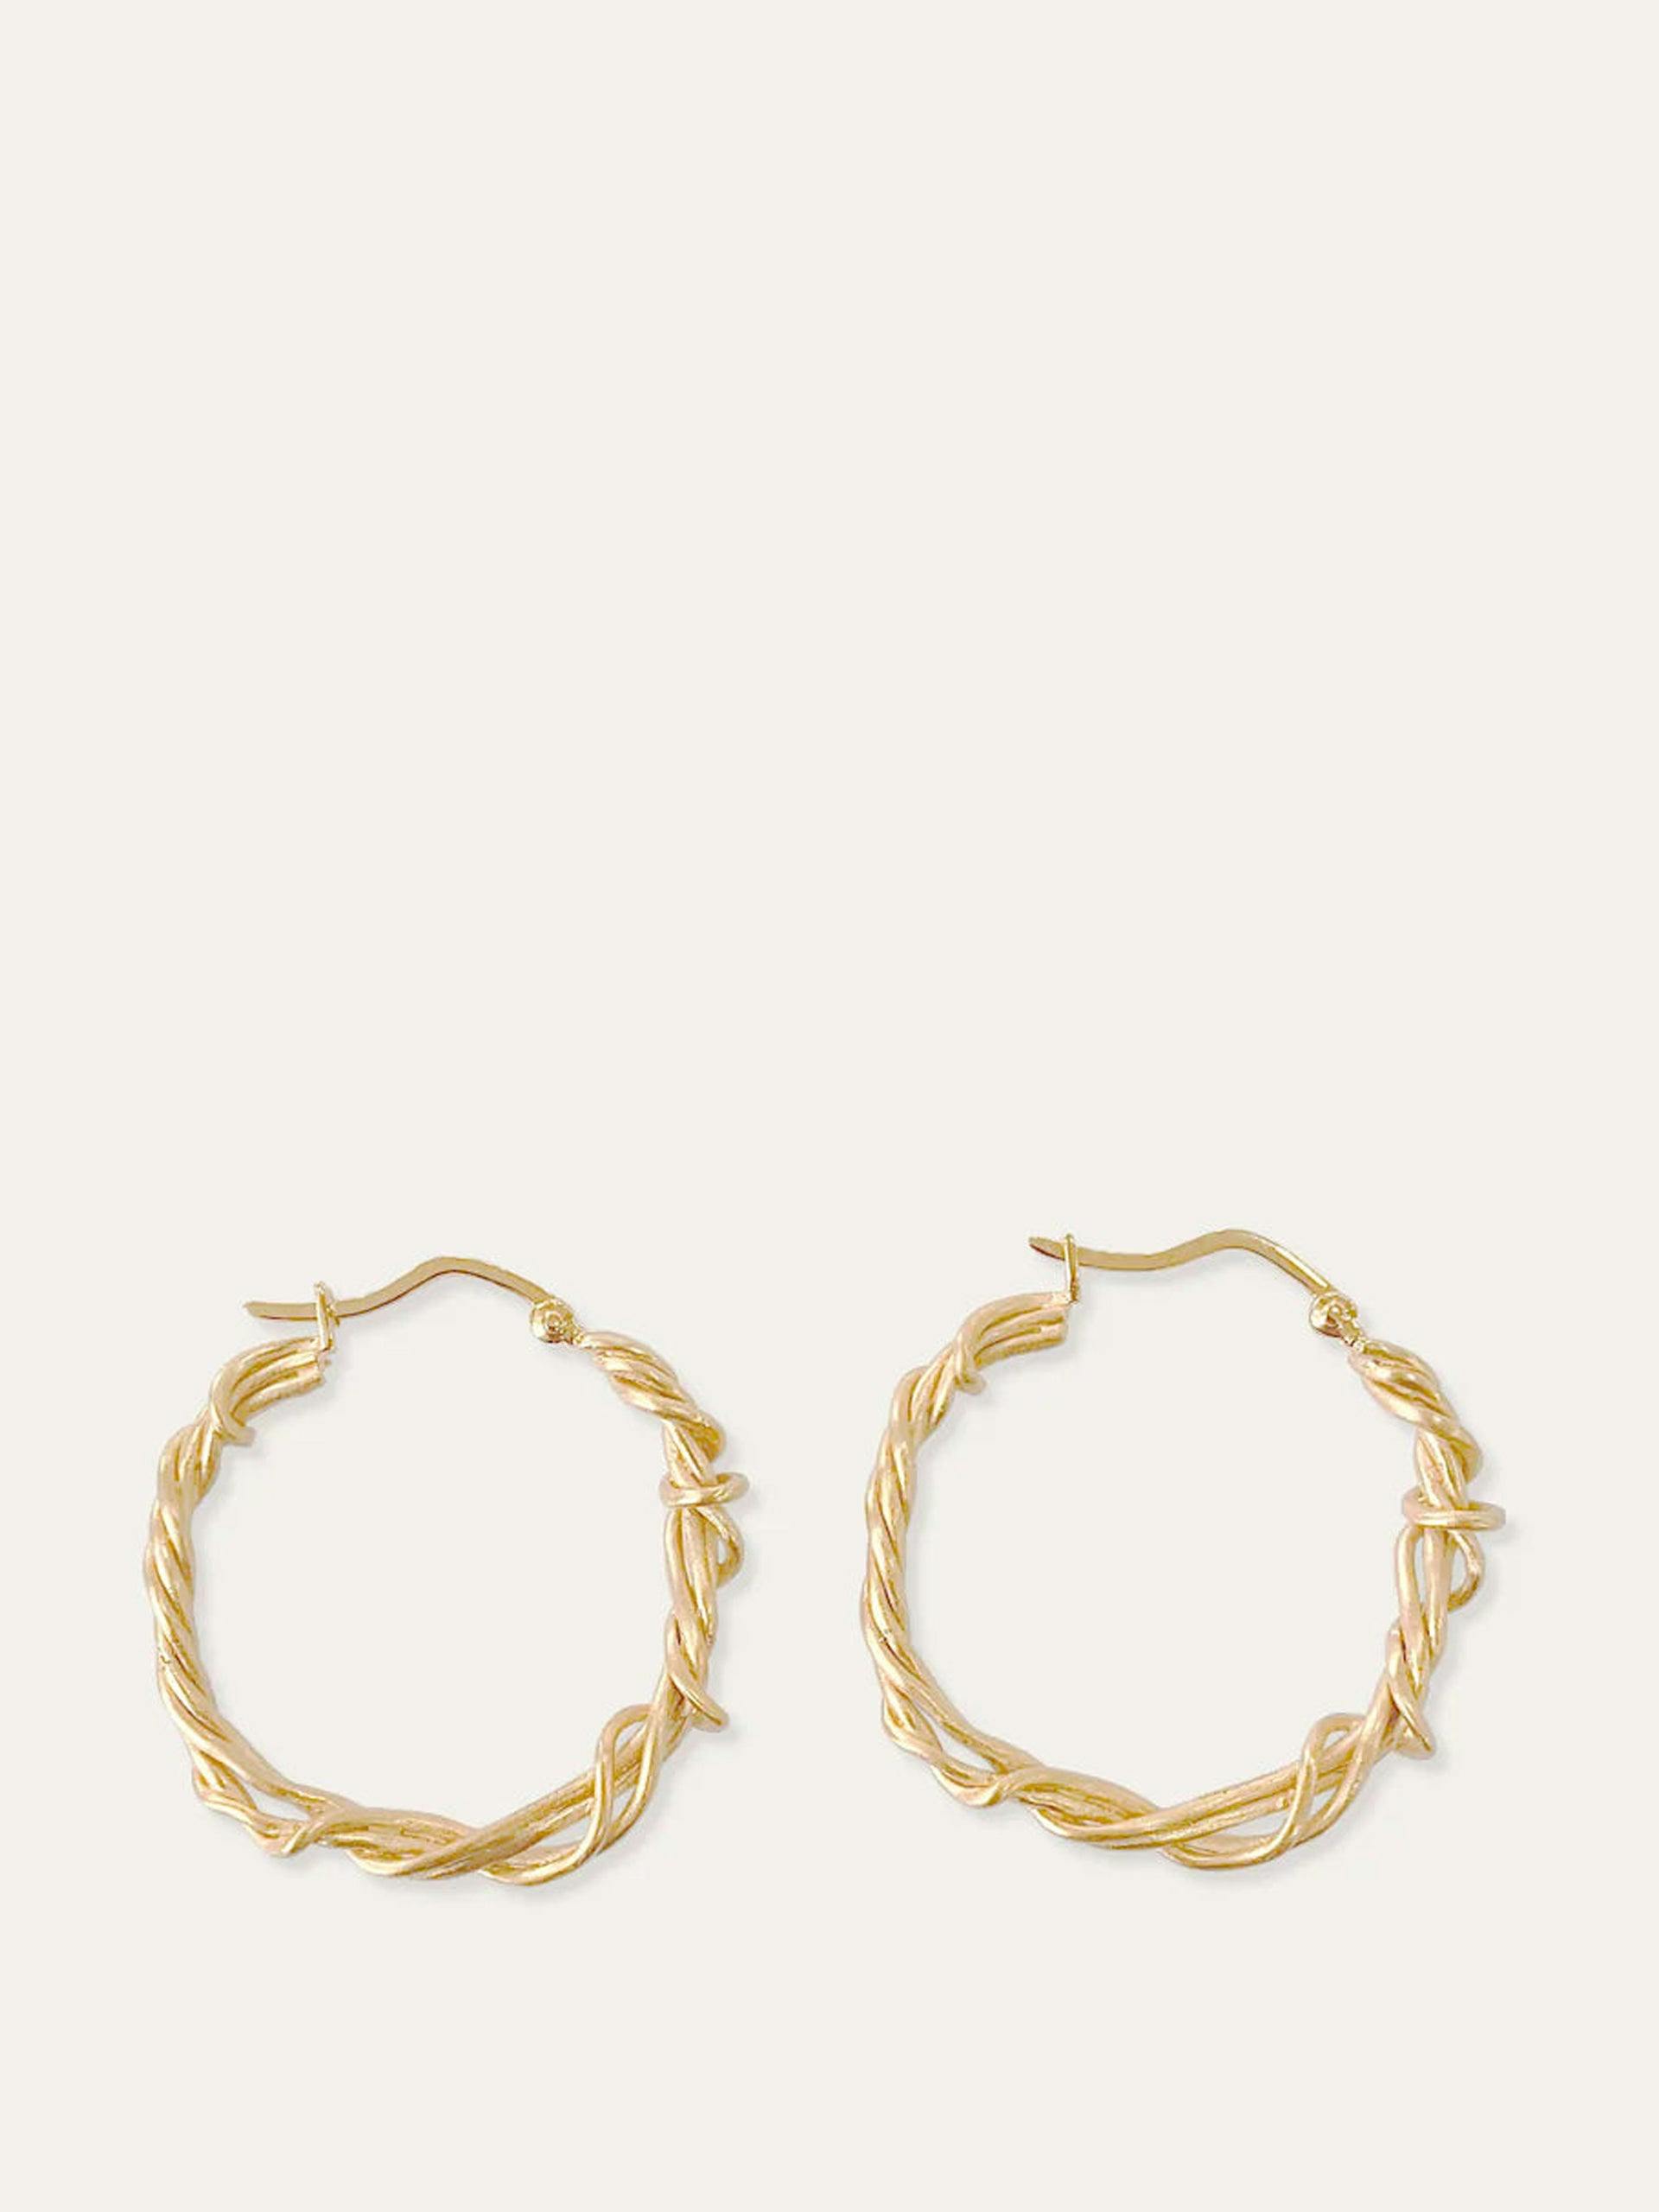 "The Chance Encounter" gold vermeil earrings